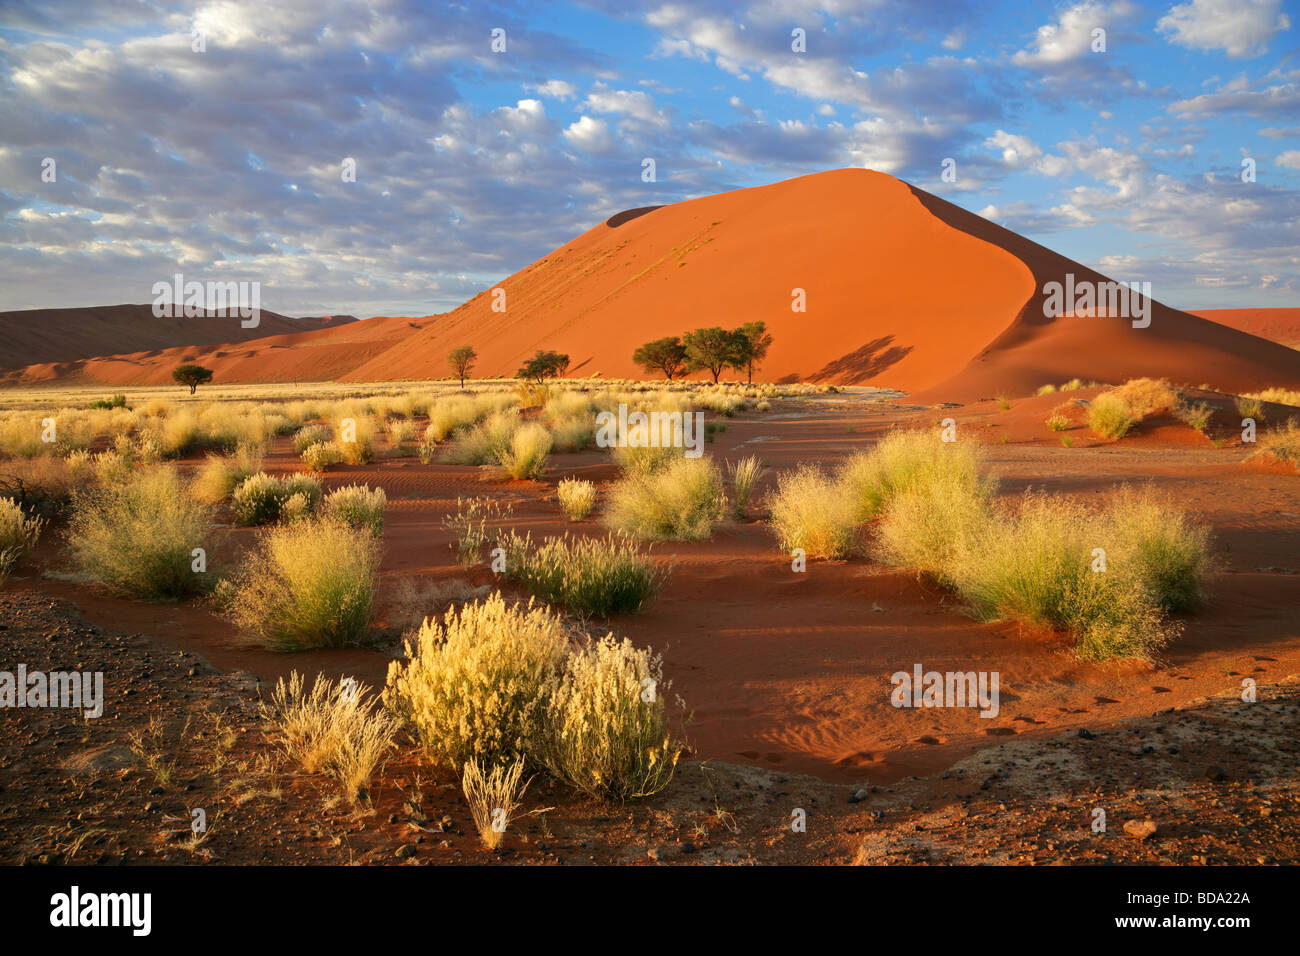 Landscape with desert grasses, large sand dune and sky with clouds, Sossusvlei, Namibia, southern Africa Stock Photo